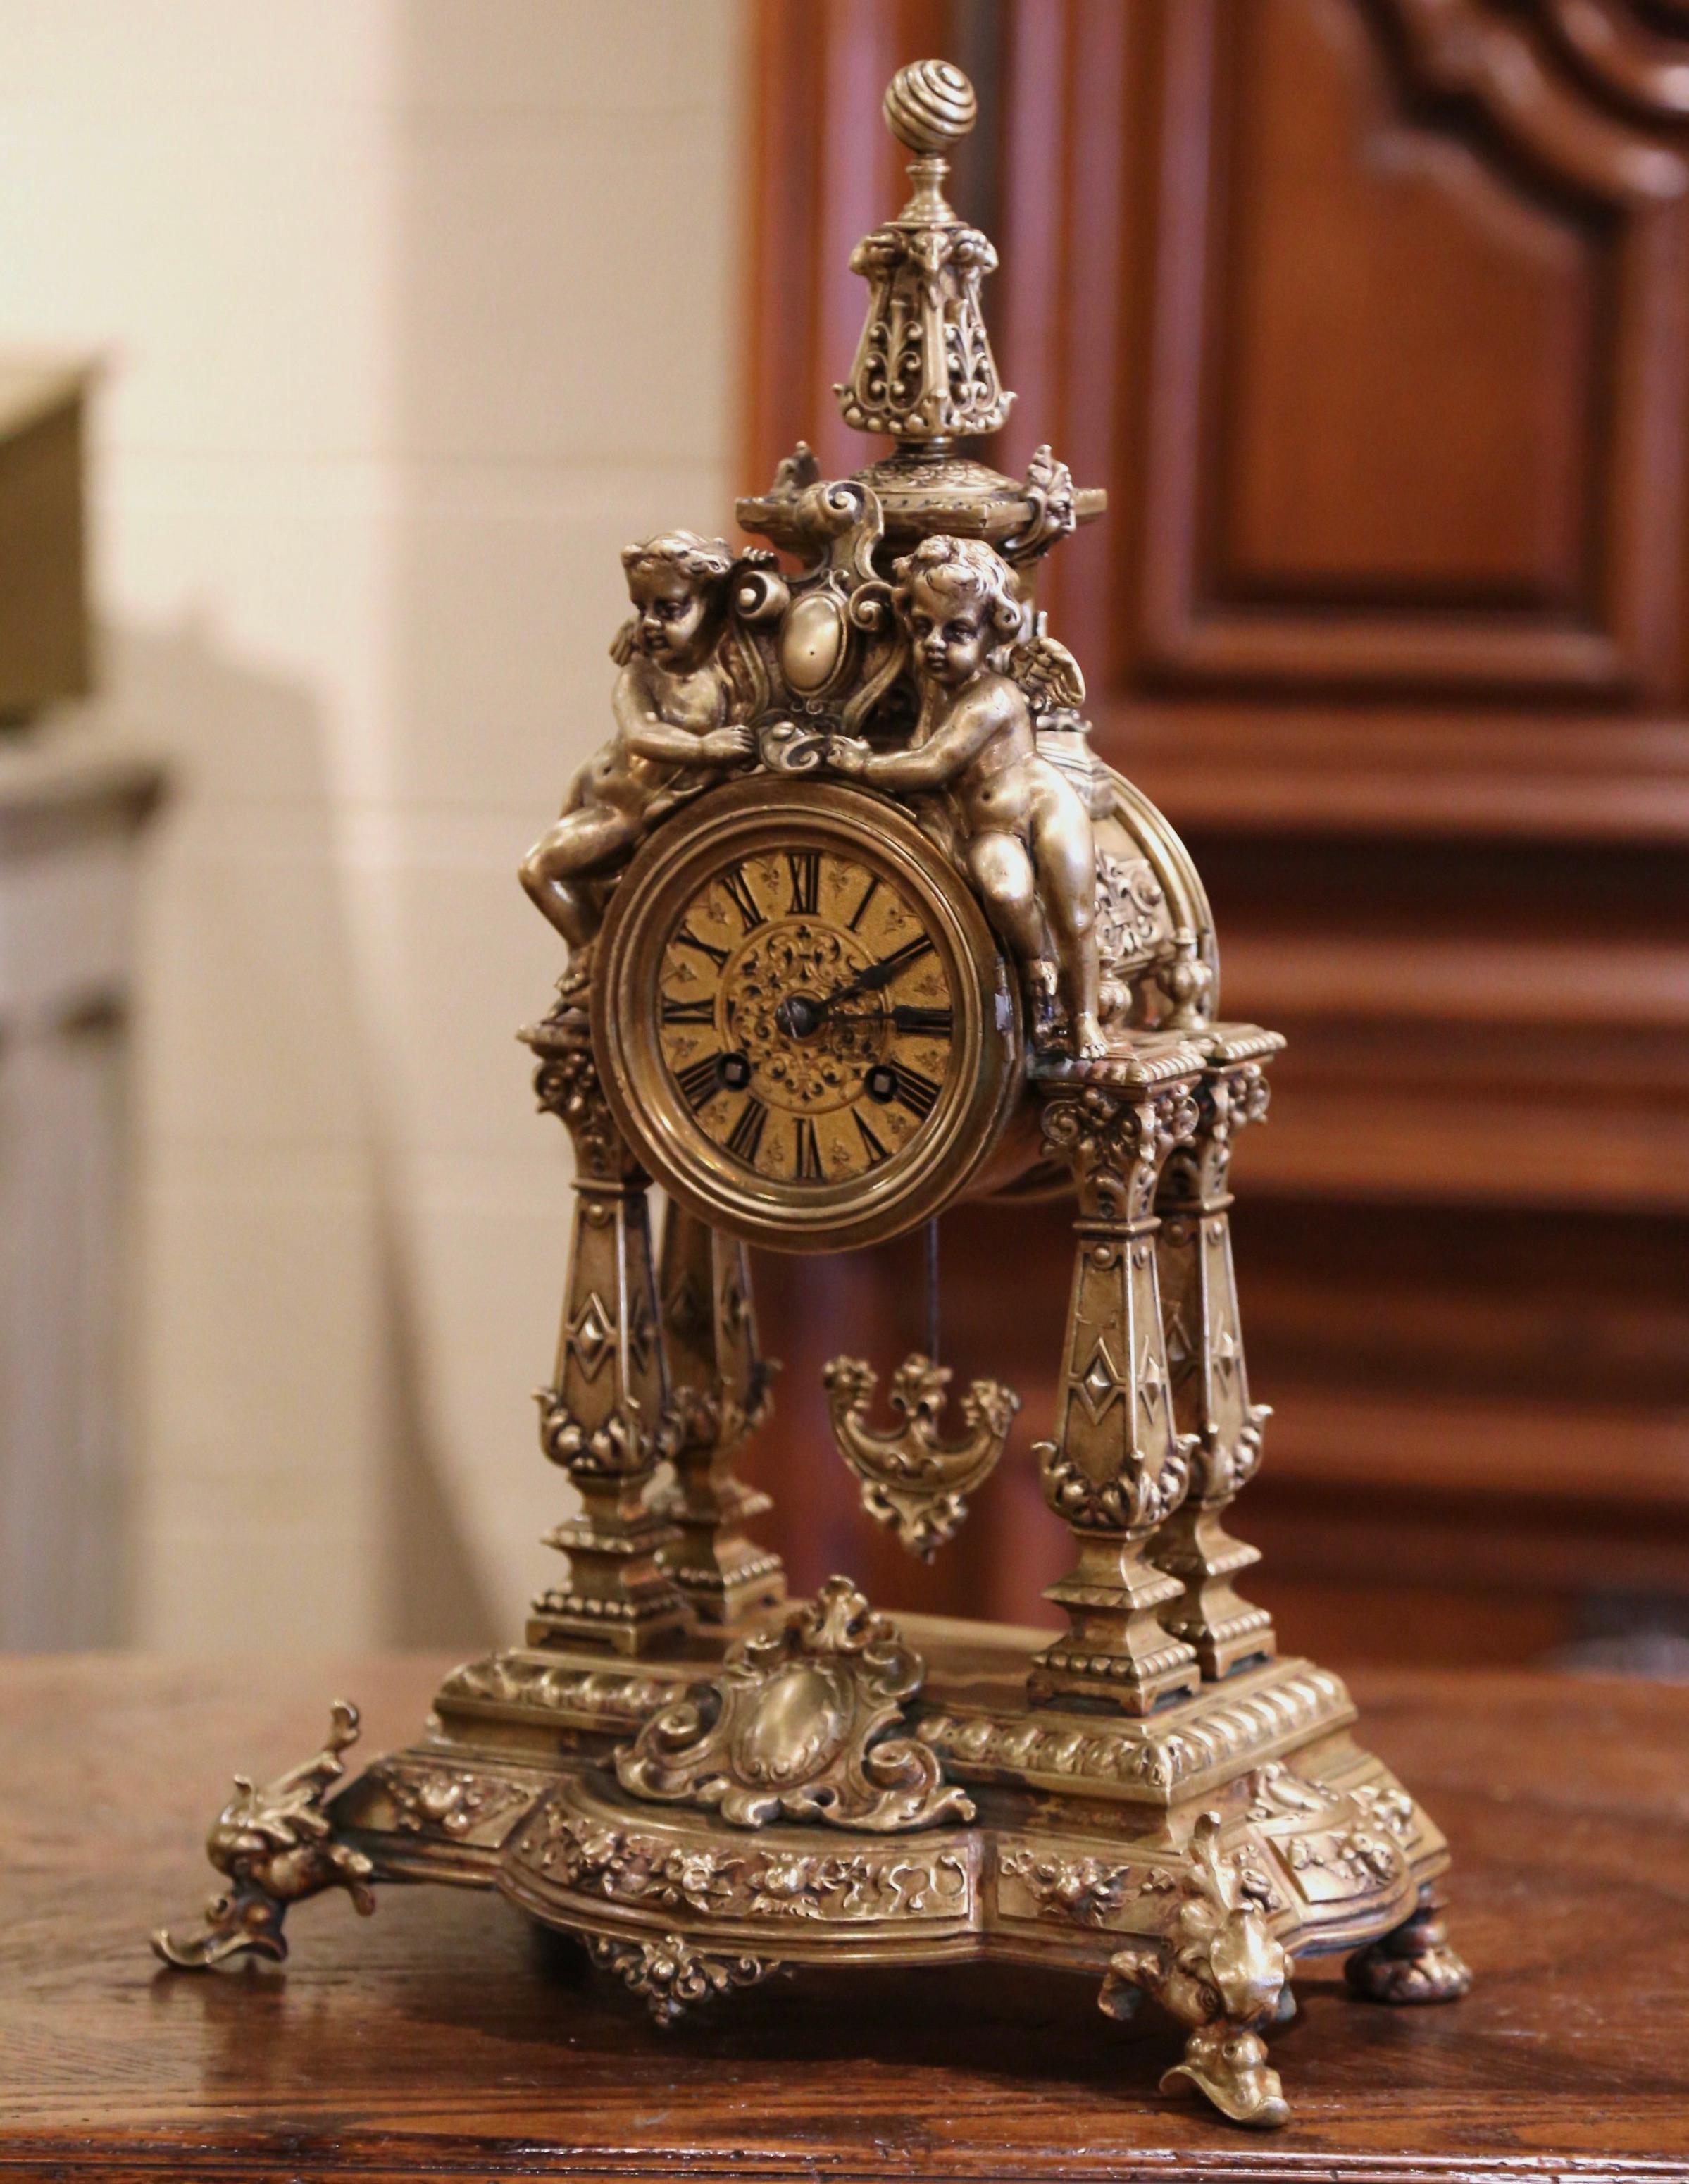 Crafted in Paris, France circa 1860, the antique time keeper stands on an attached ornate base over scrolled feet; the portico clock with side columns and decorative top finial is decorated with two cherubs holding a shield. The clock is further